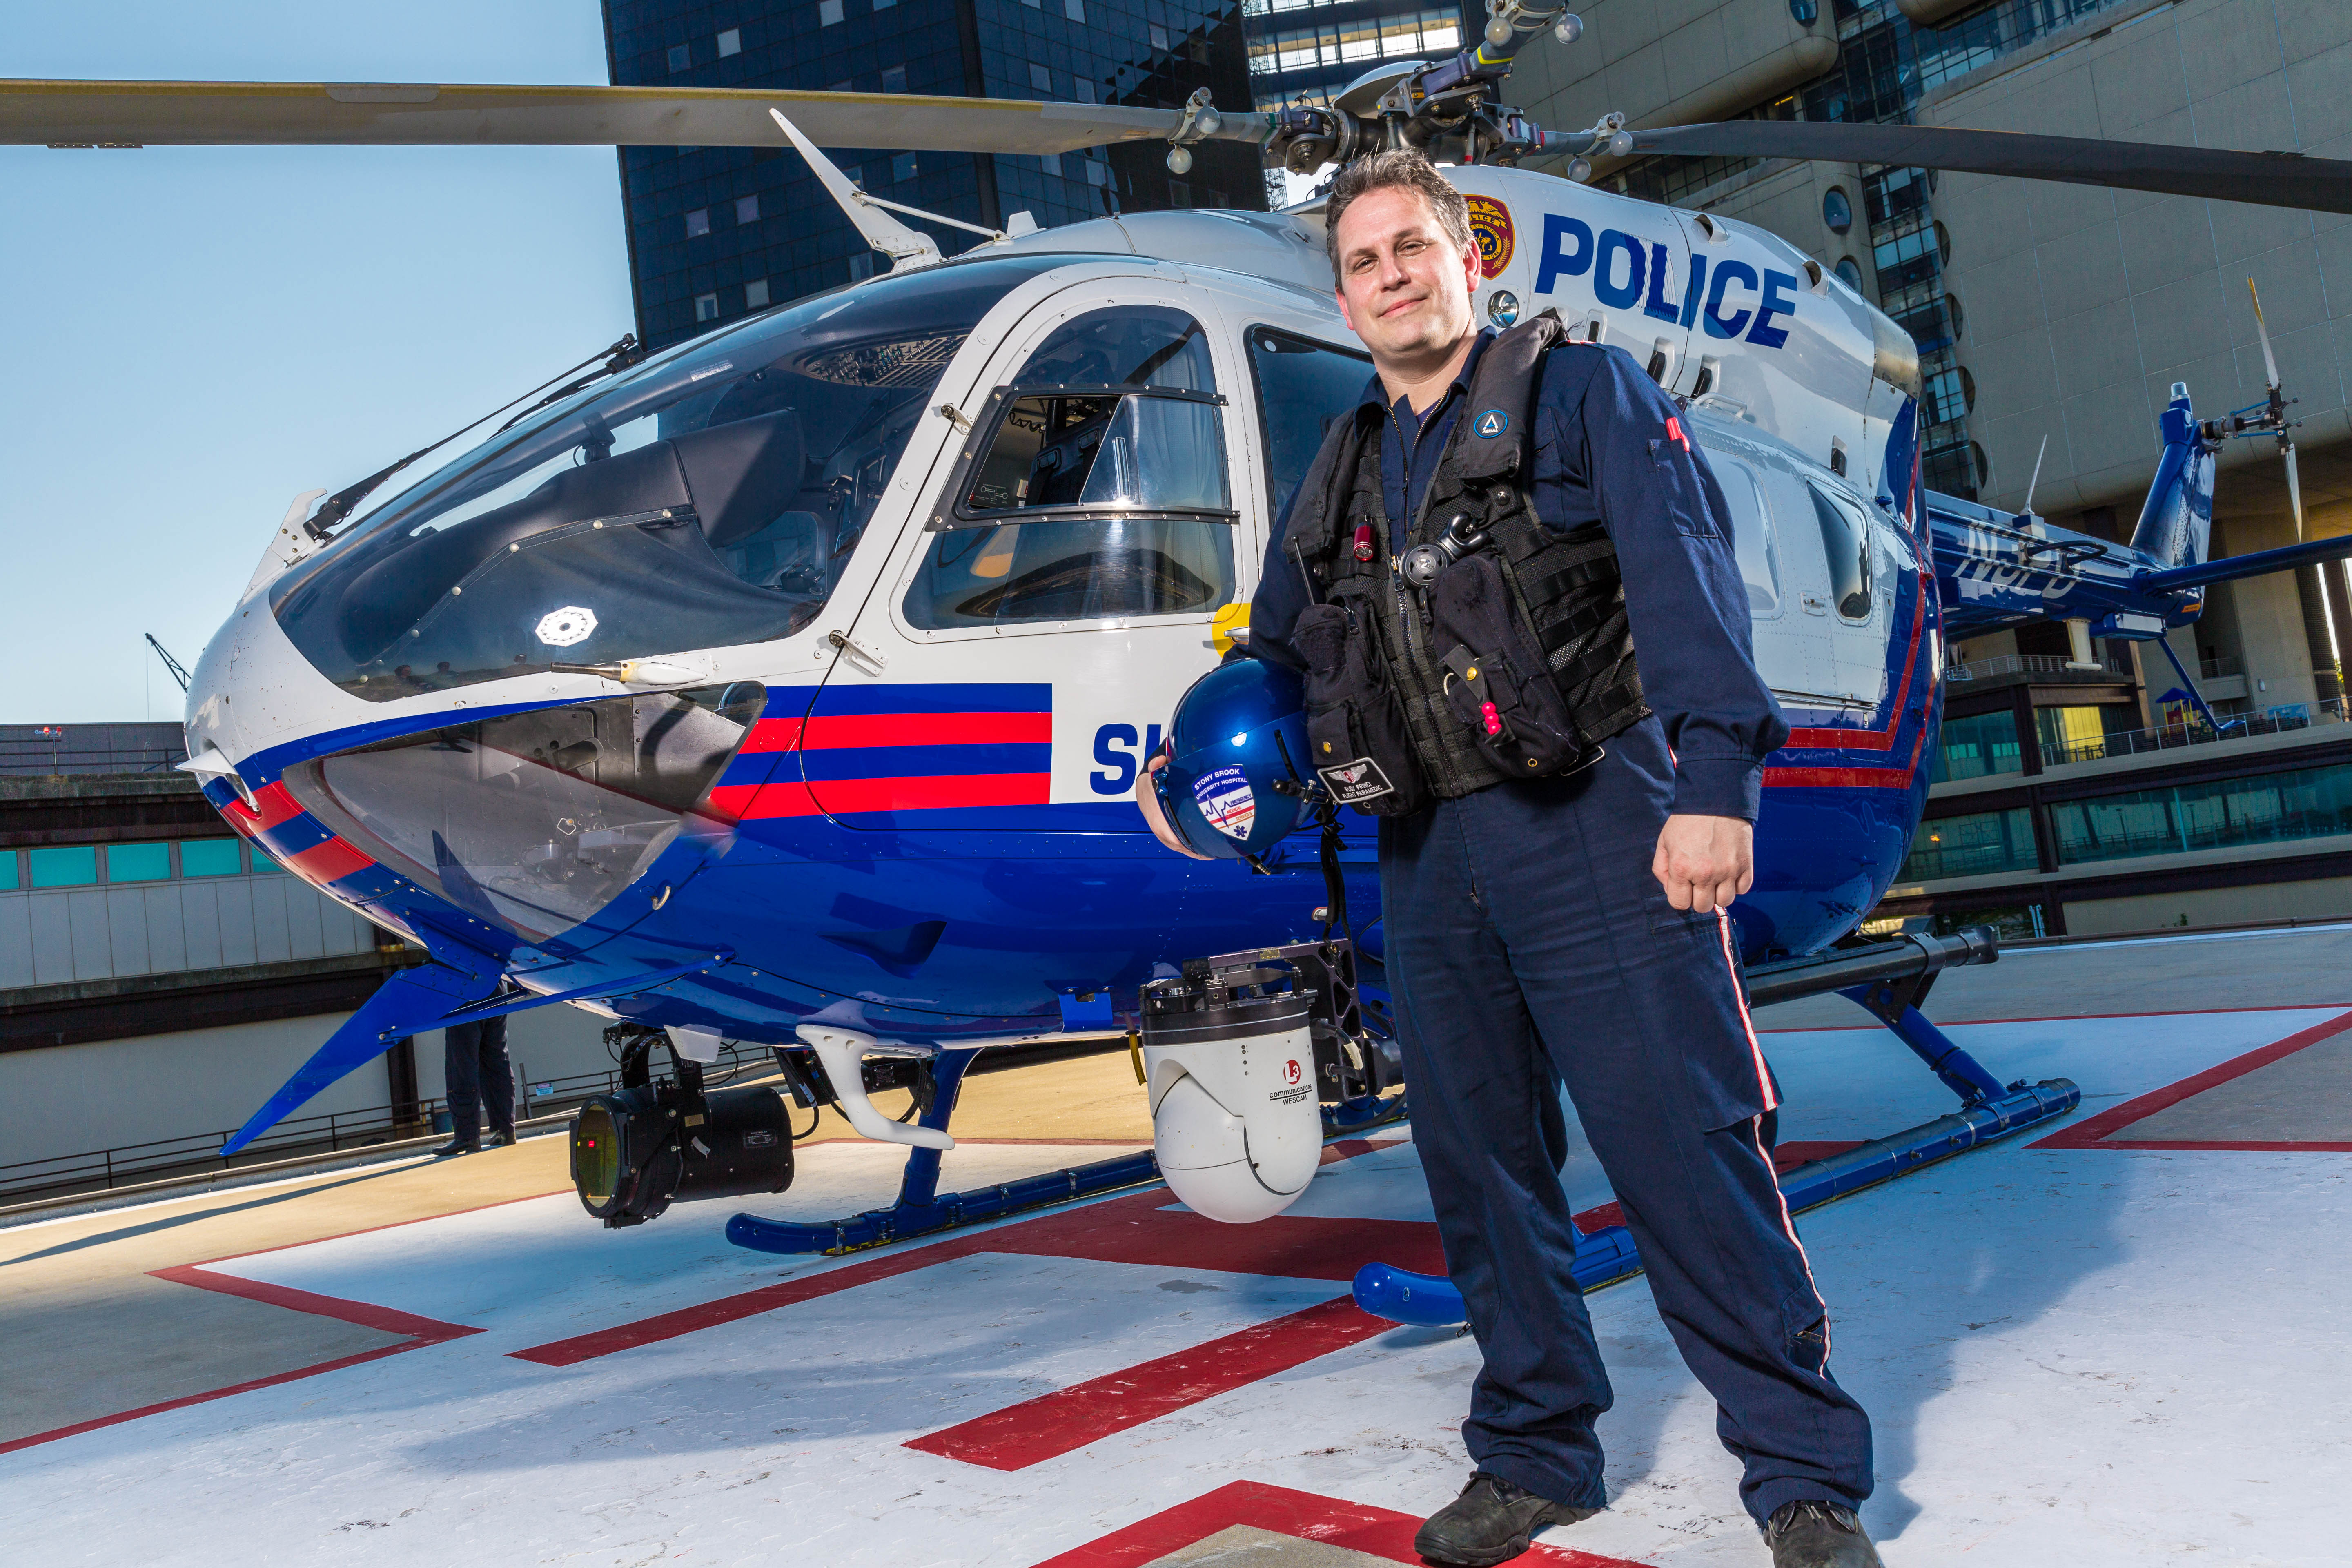 Rudolph Princi in front of EMS Helicopter